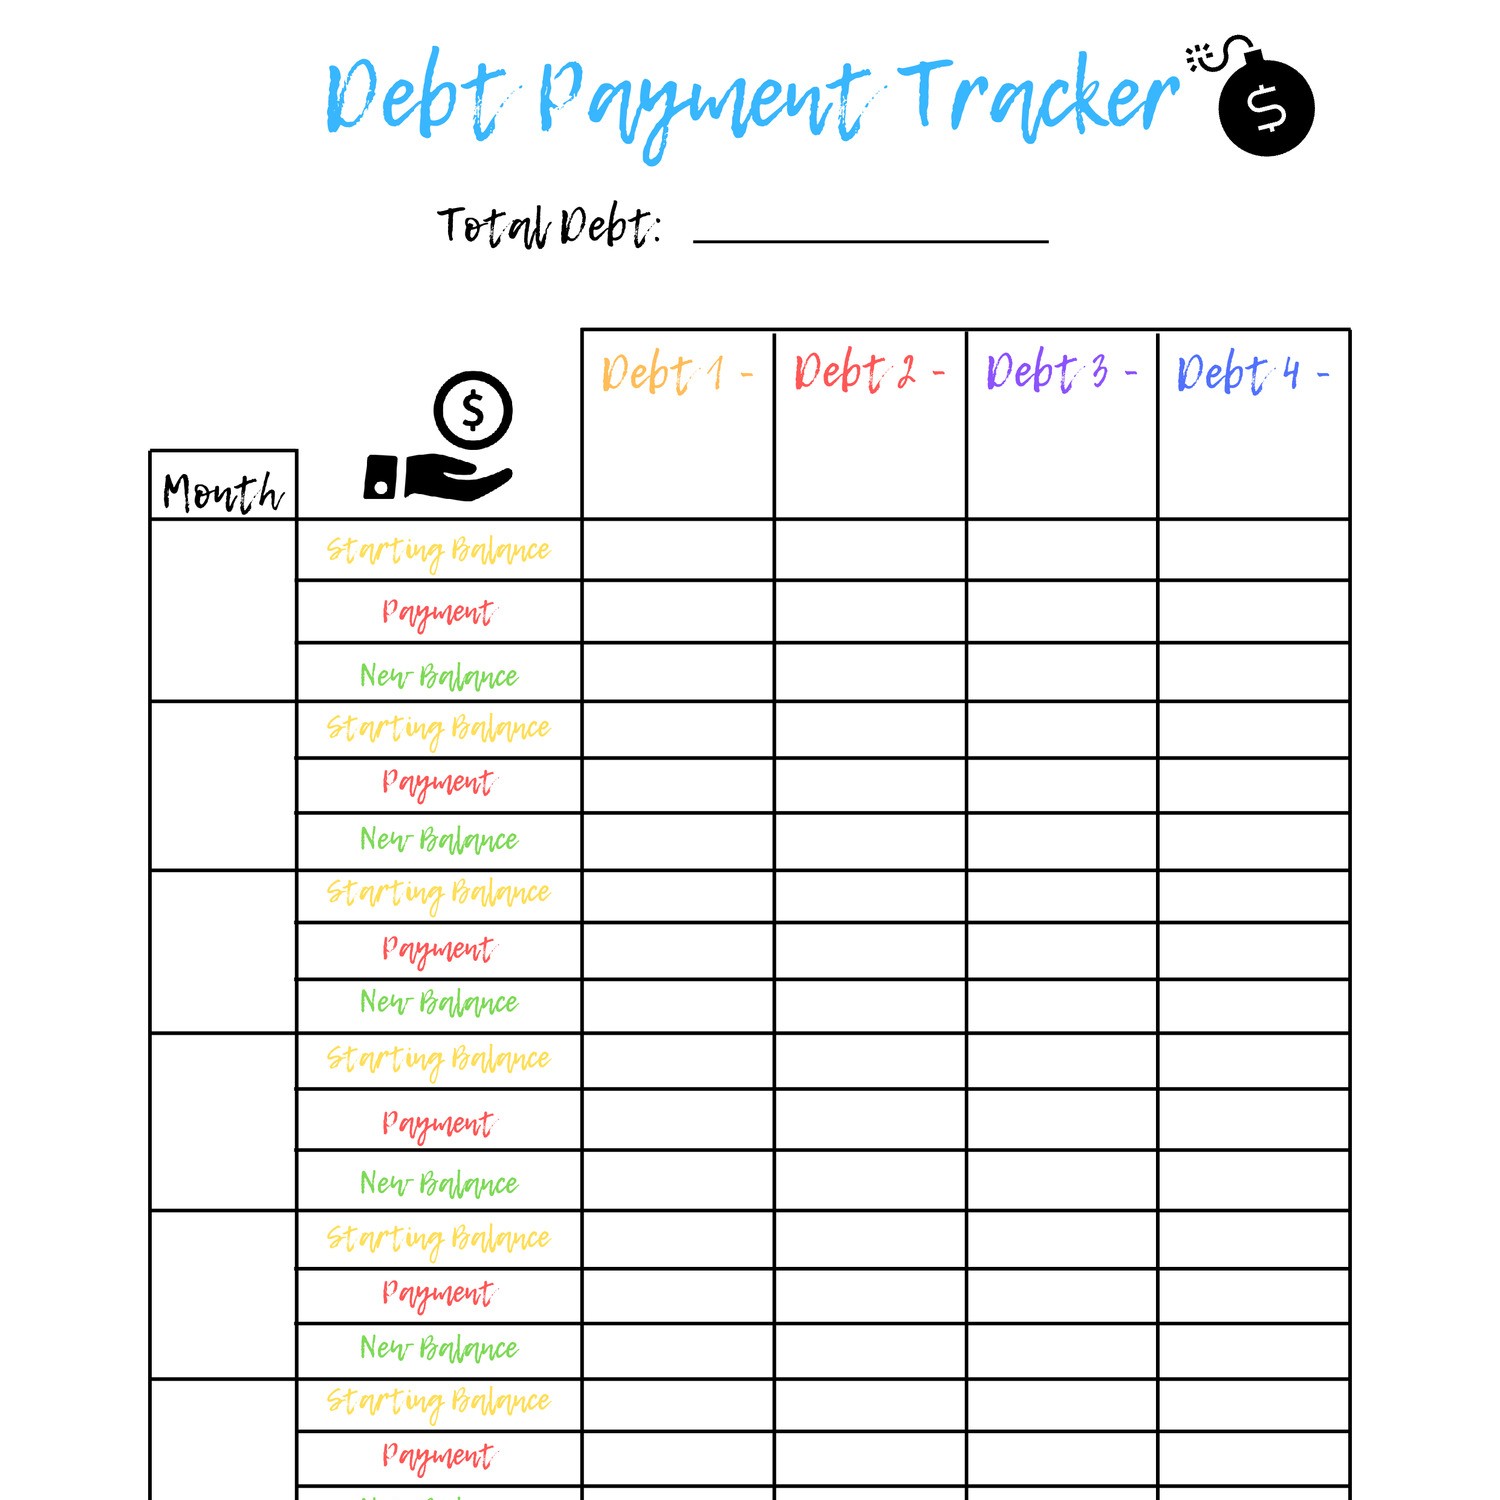 Debt Payment Tracker.pdf DocDroid